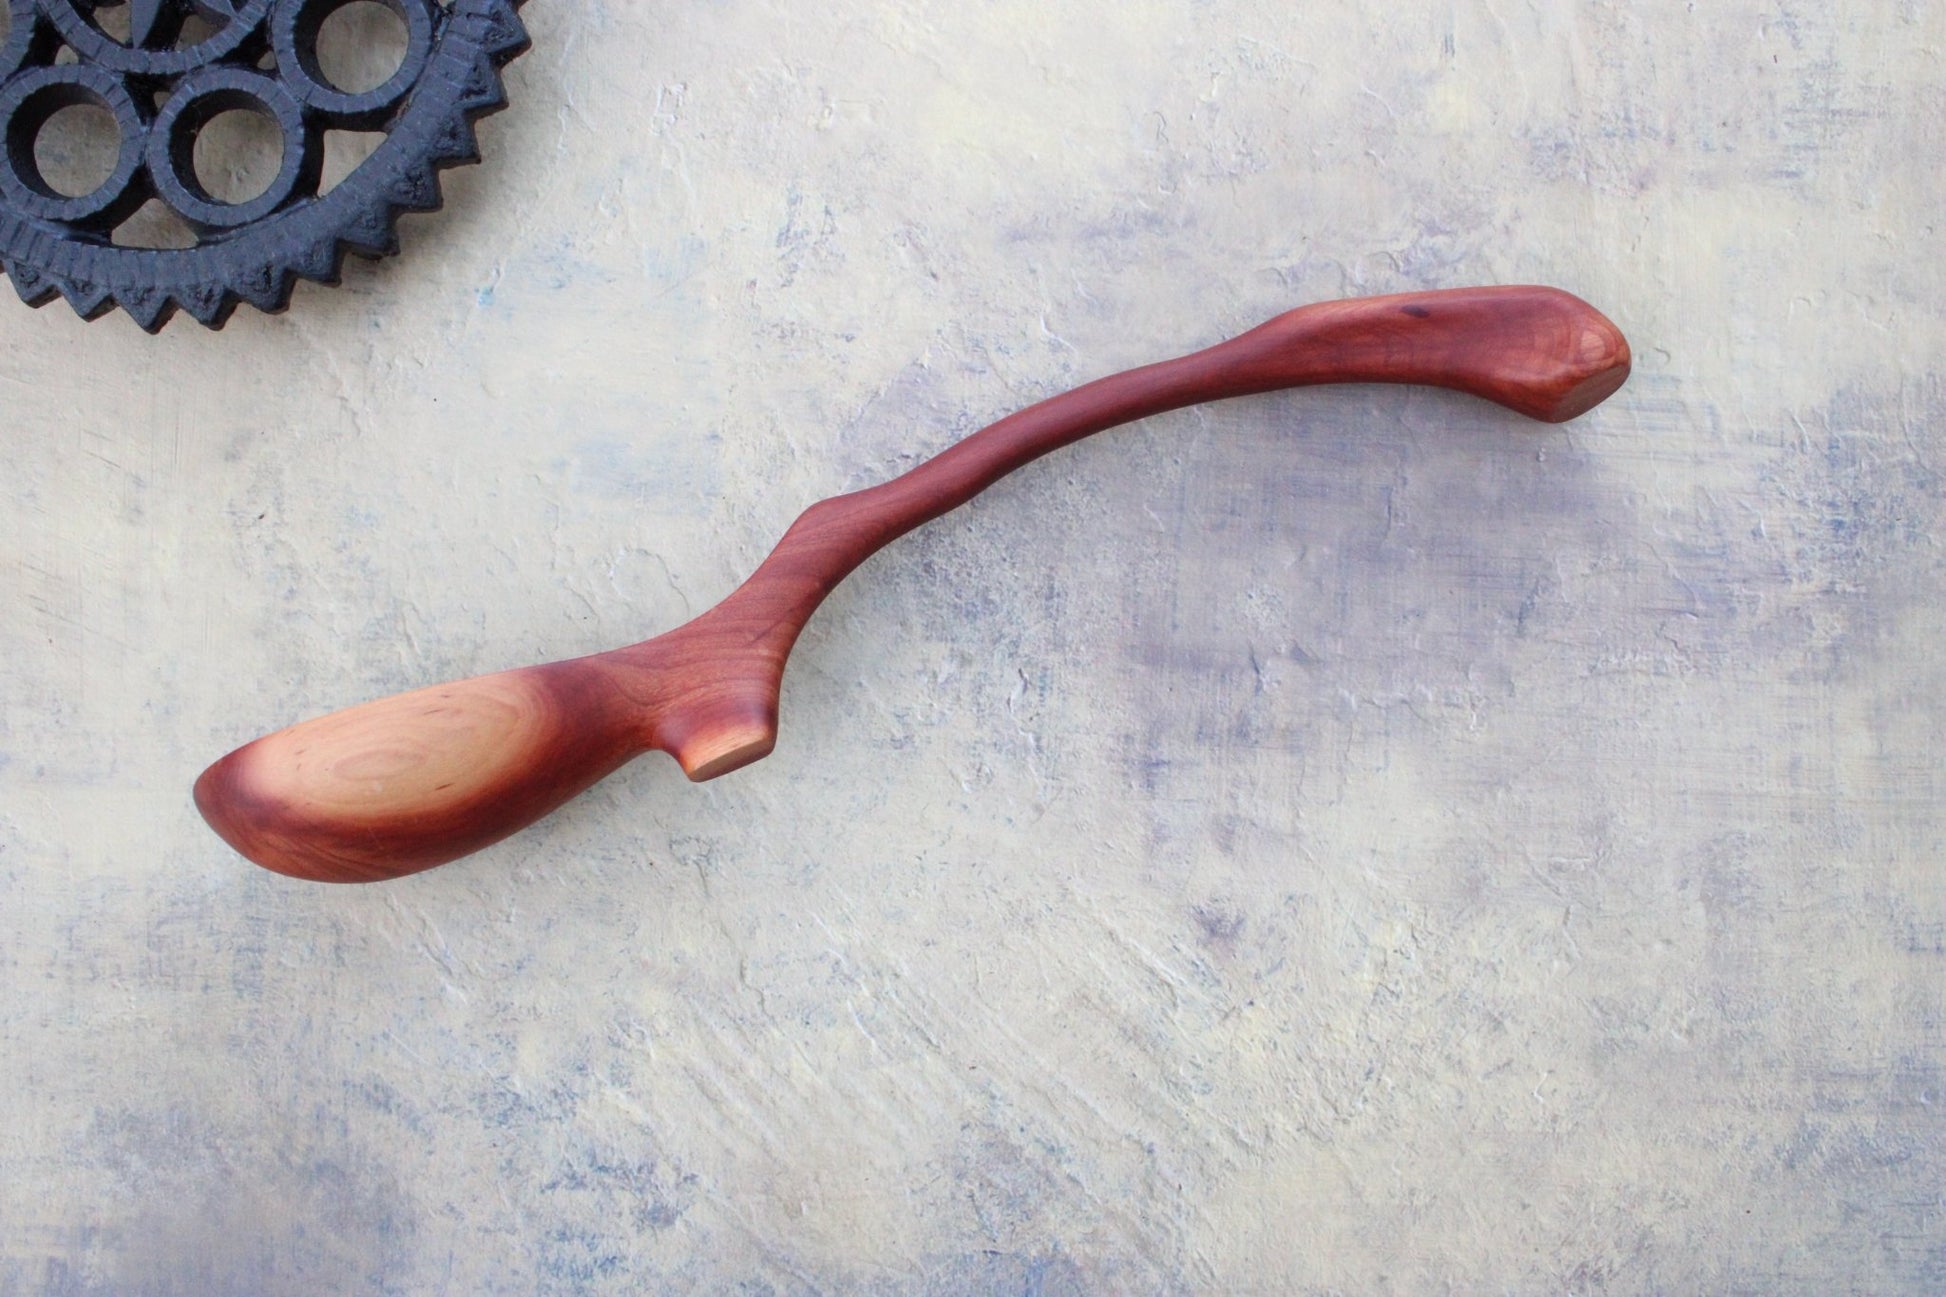 Manzanita Serving, Stirring & Cooking Spoon, Hand Carved Kitchen Utensil, Sustainably Sourced Wooden Wares - Blue Sage Family Farm